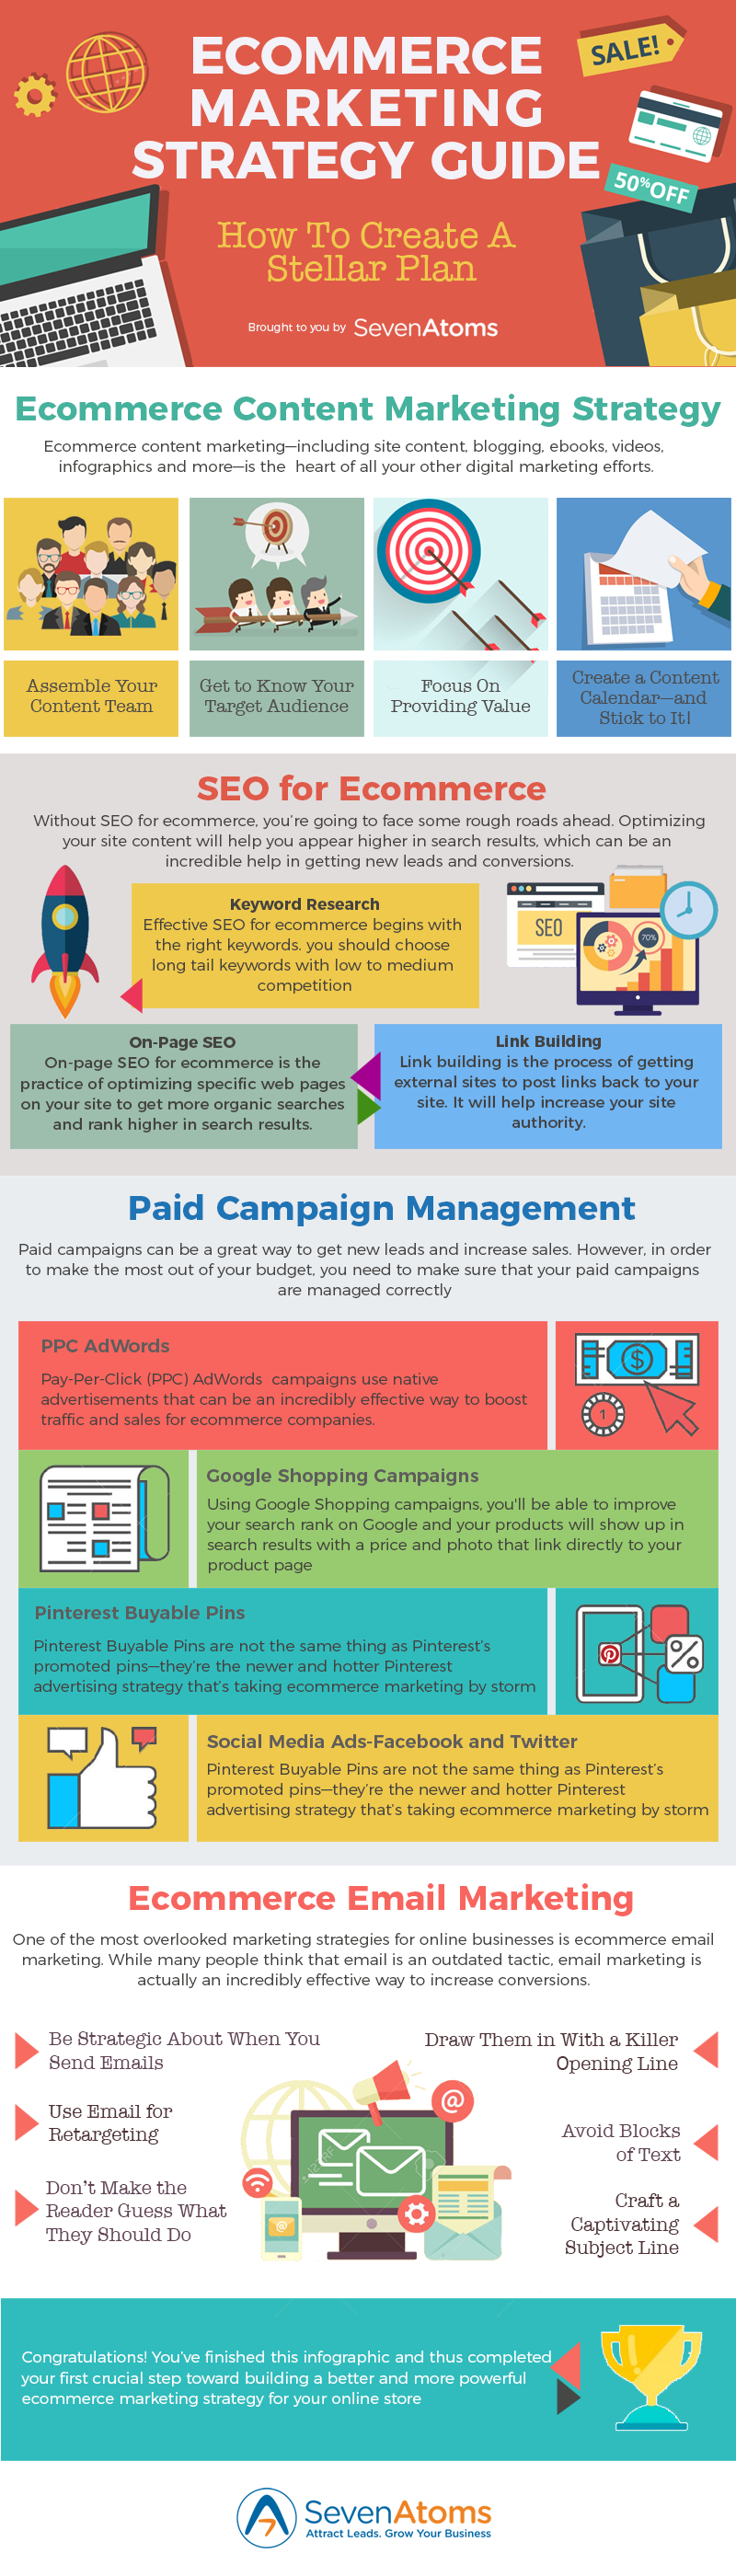 Ecommerce Marketing Strategy Guide [INFOGRAPHIC]